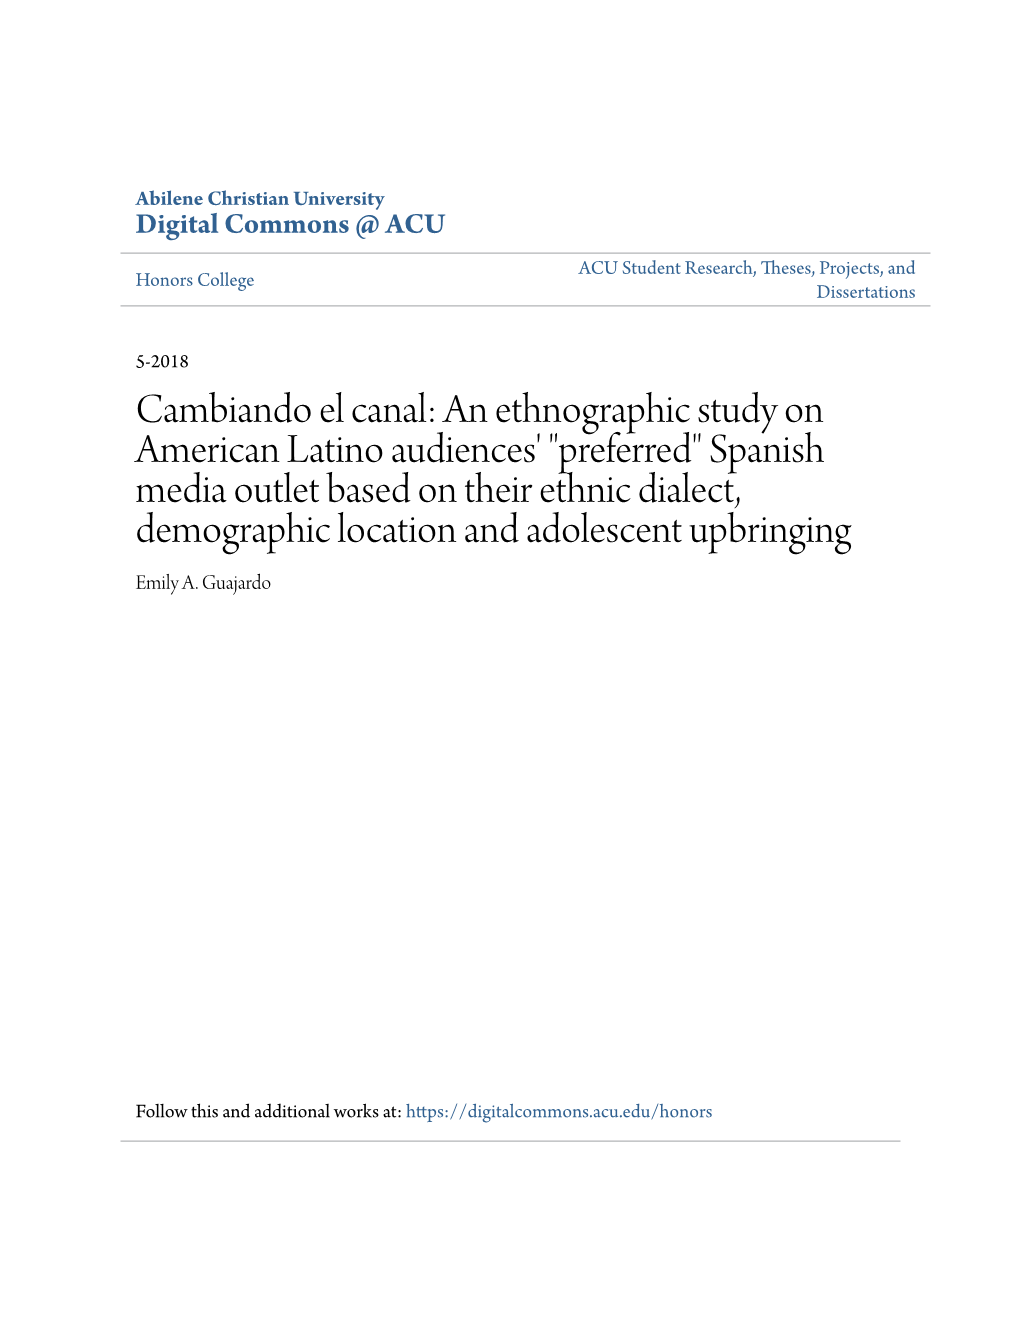 Cambiando El Canal: an Ethnographic Study on American Latino